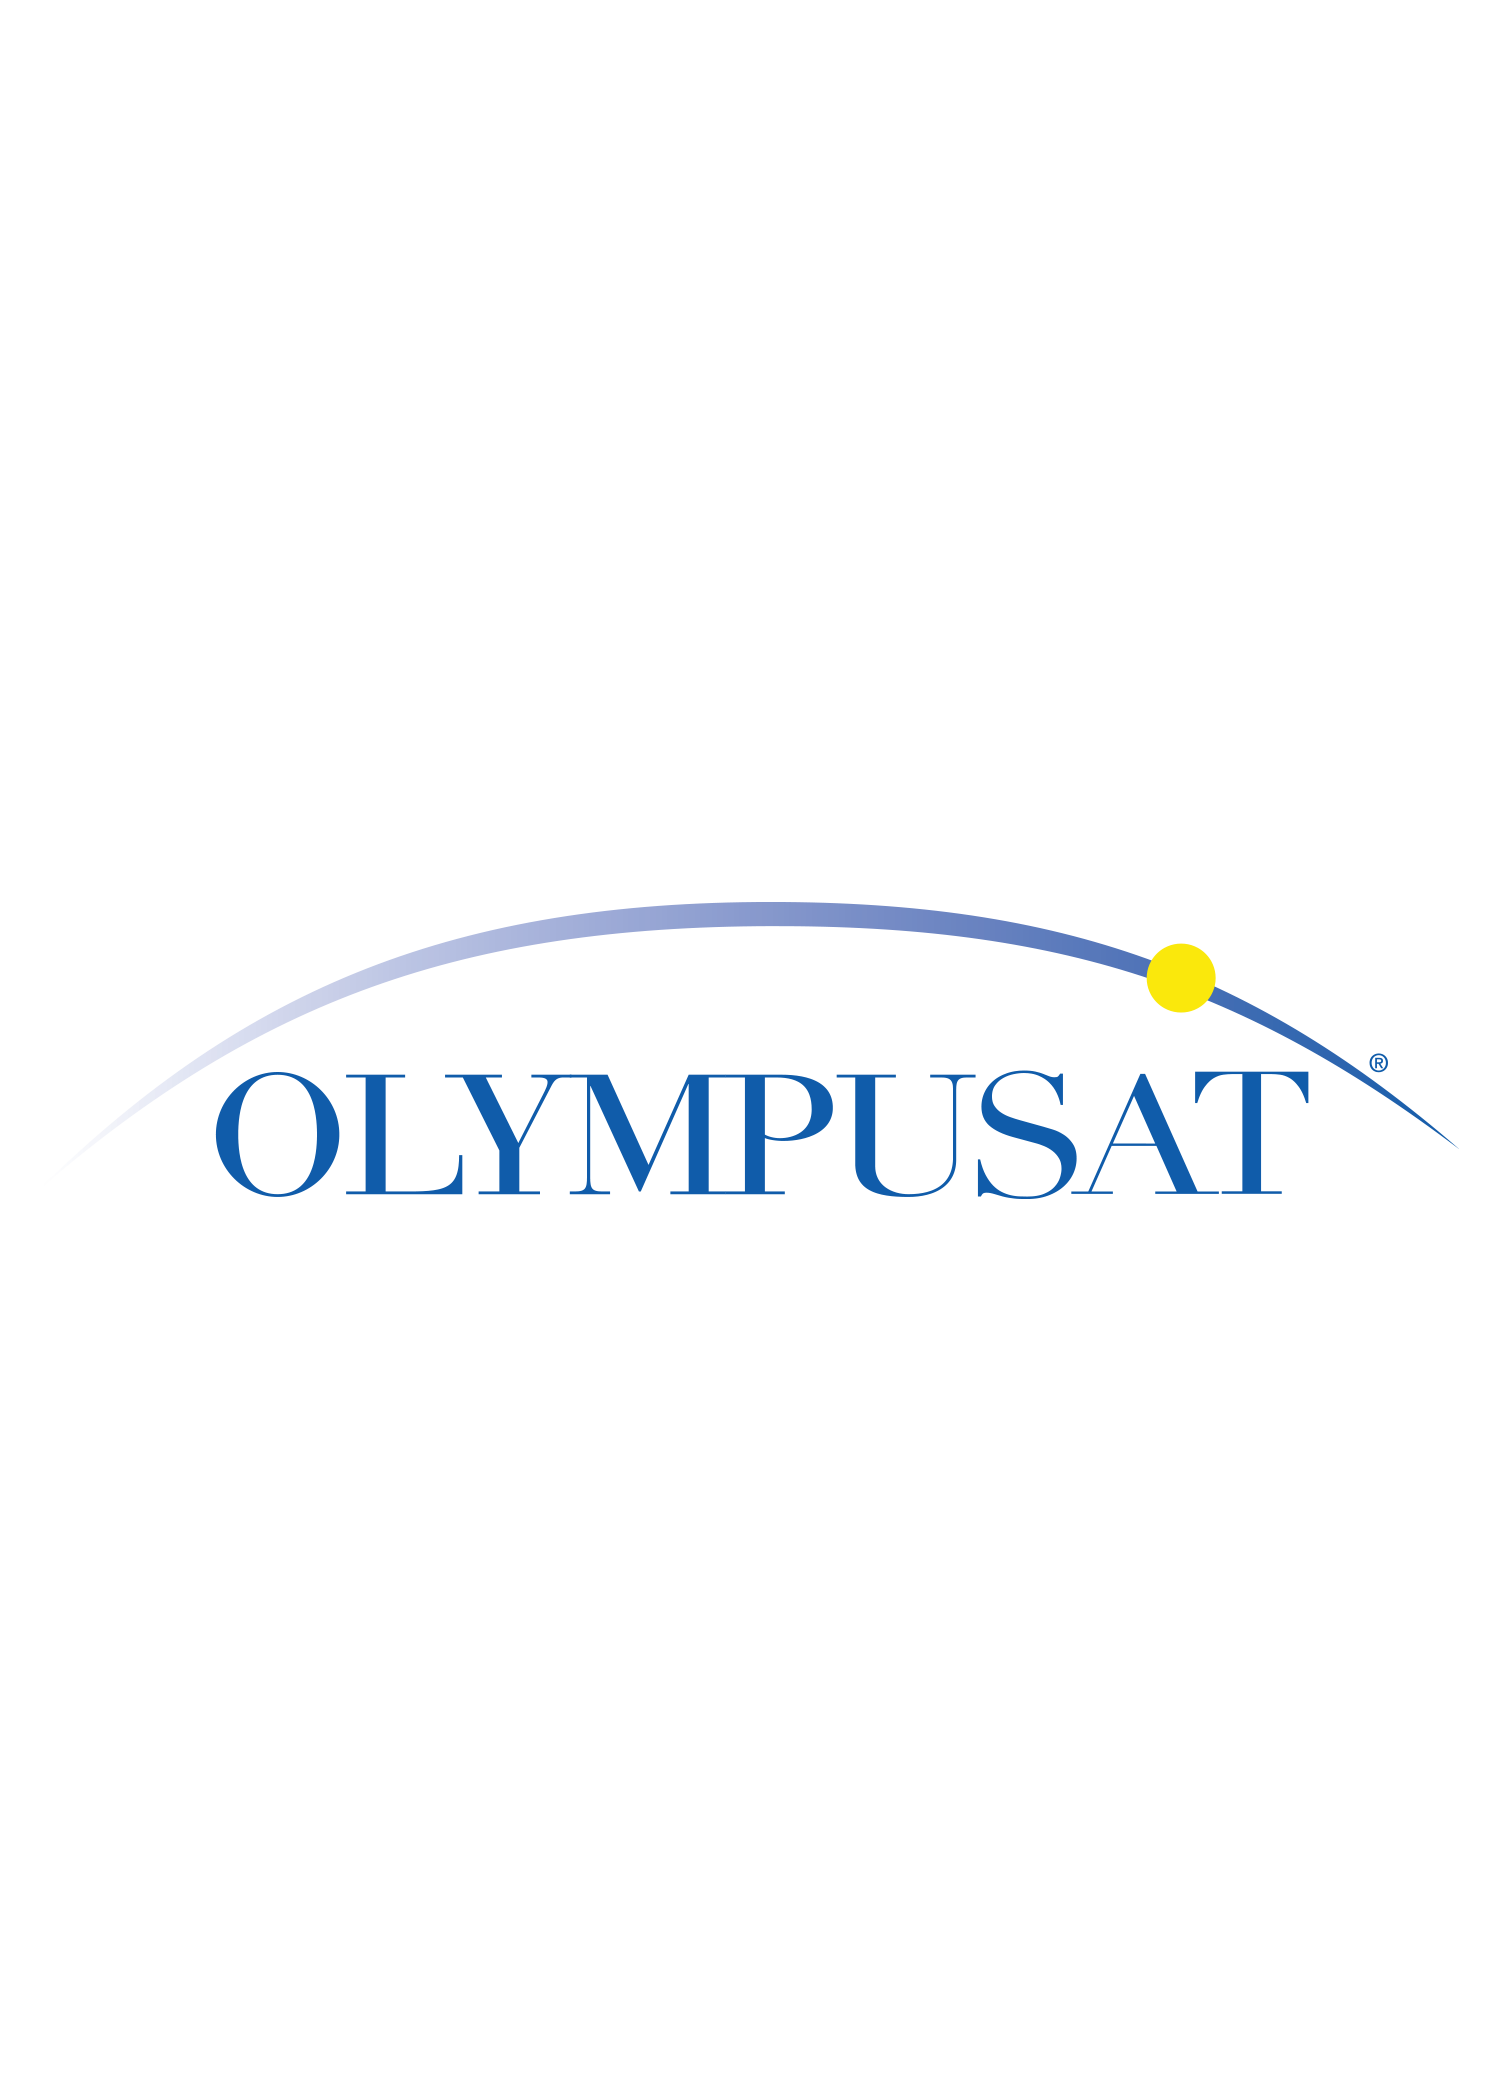 OLYMPUSAT joins forc